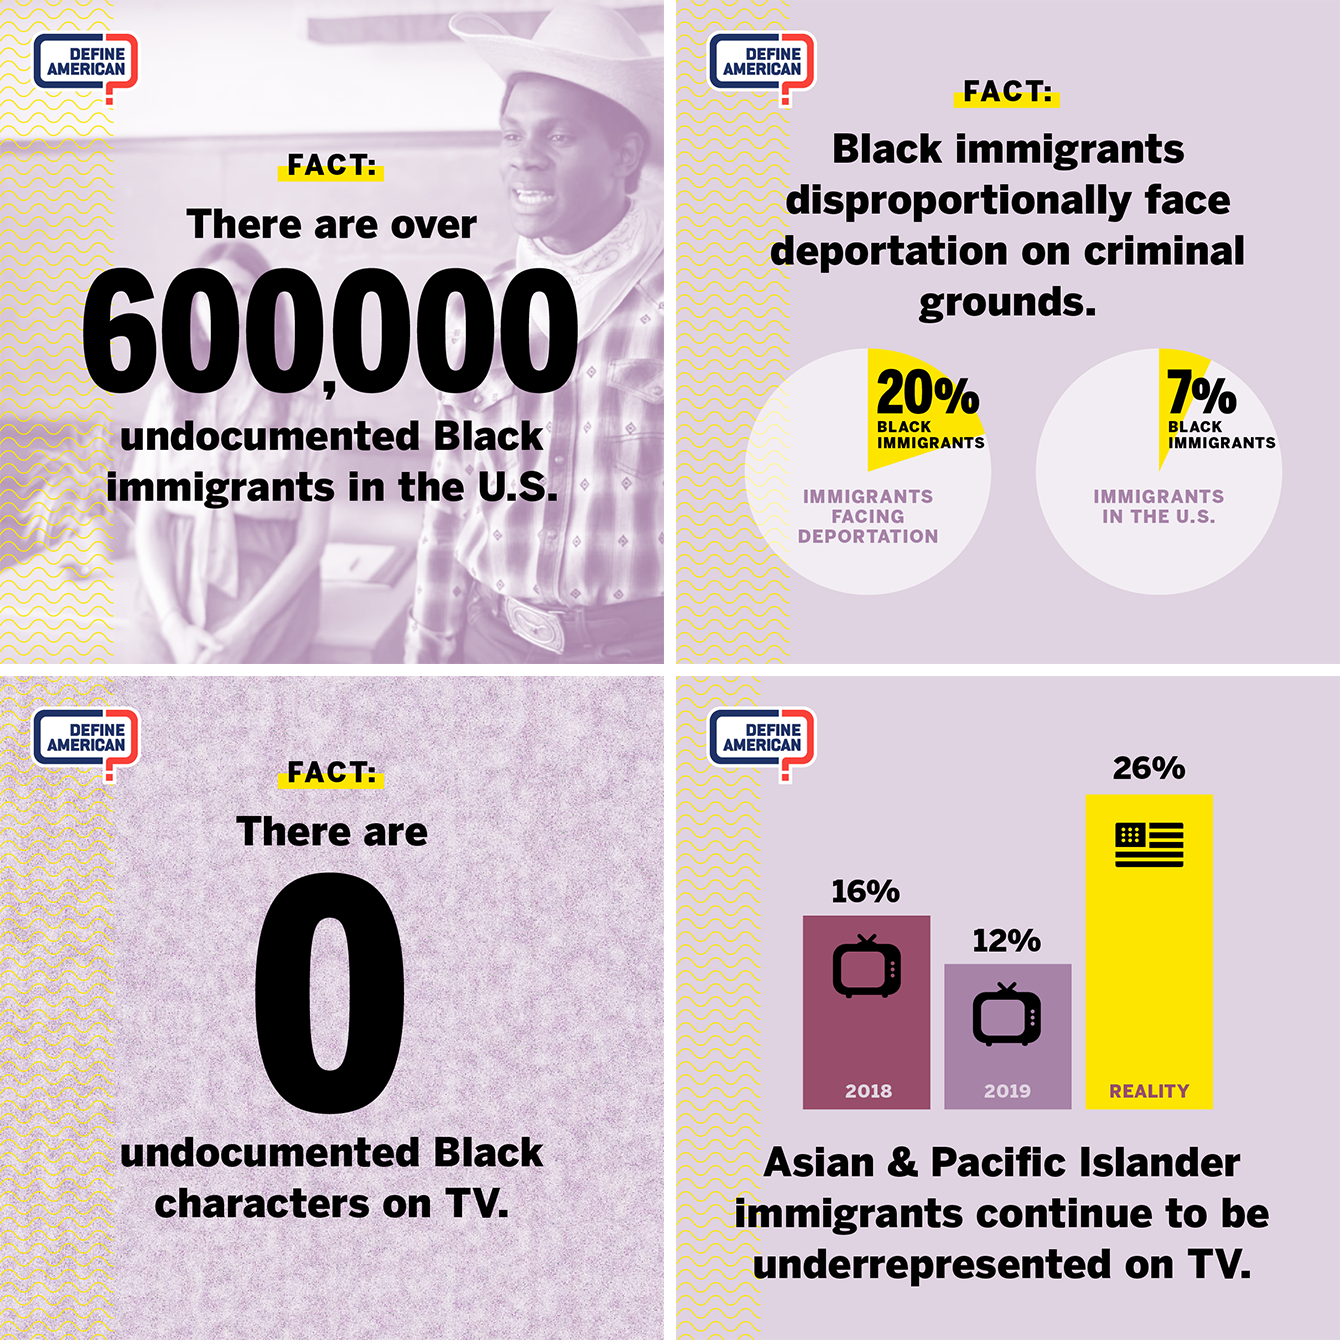 Social graphics with statistics about Black immigrants and API immigrants in real life and as (under)represented on TV.